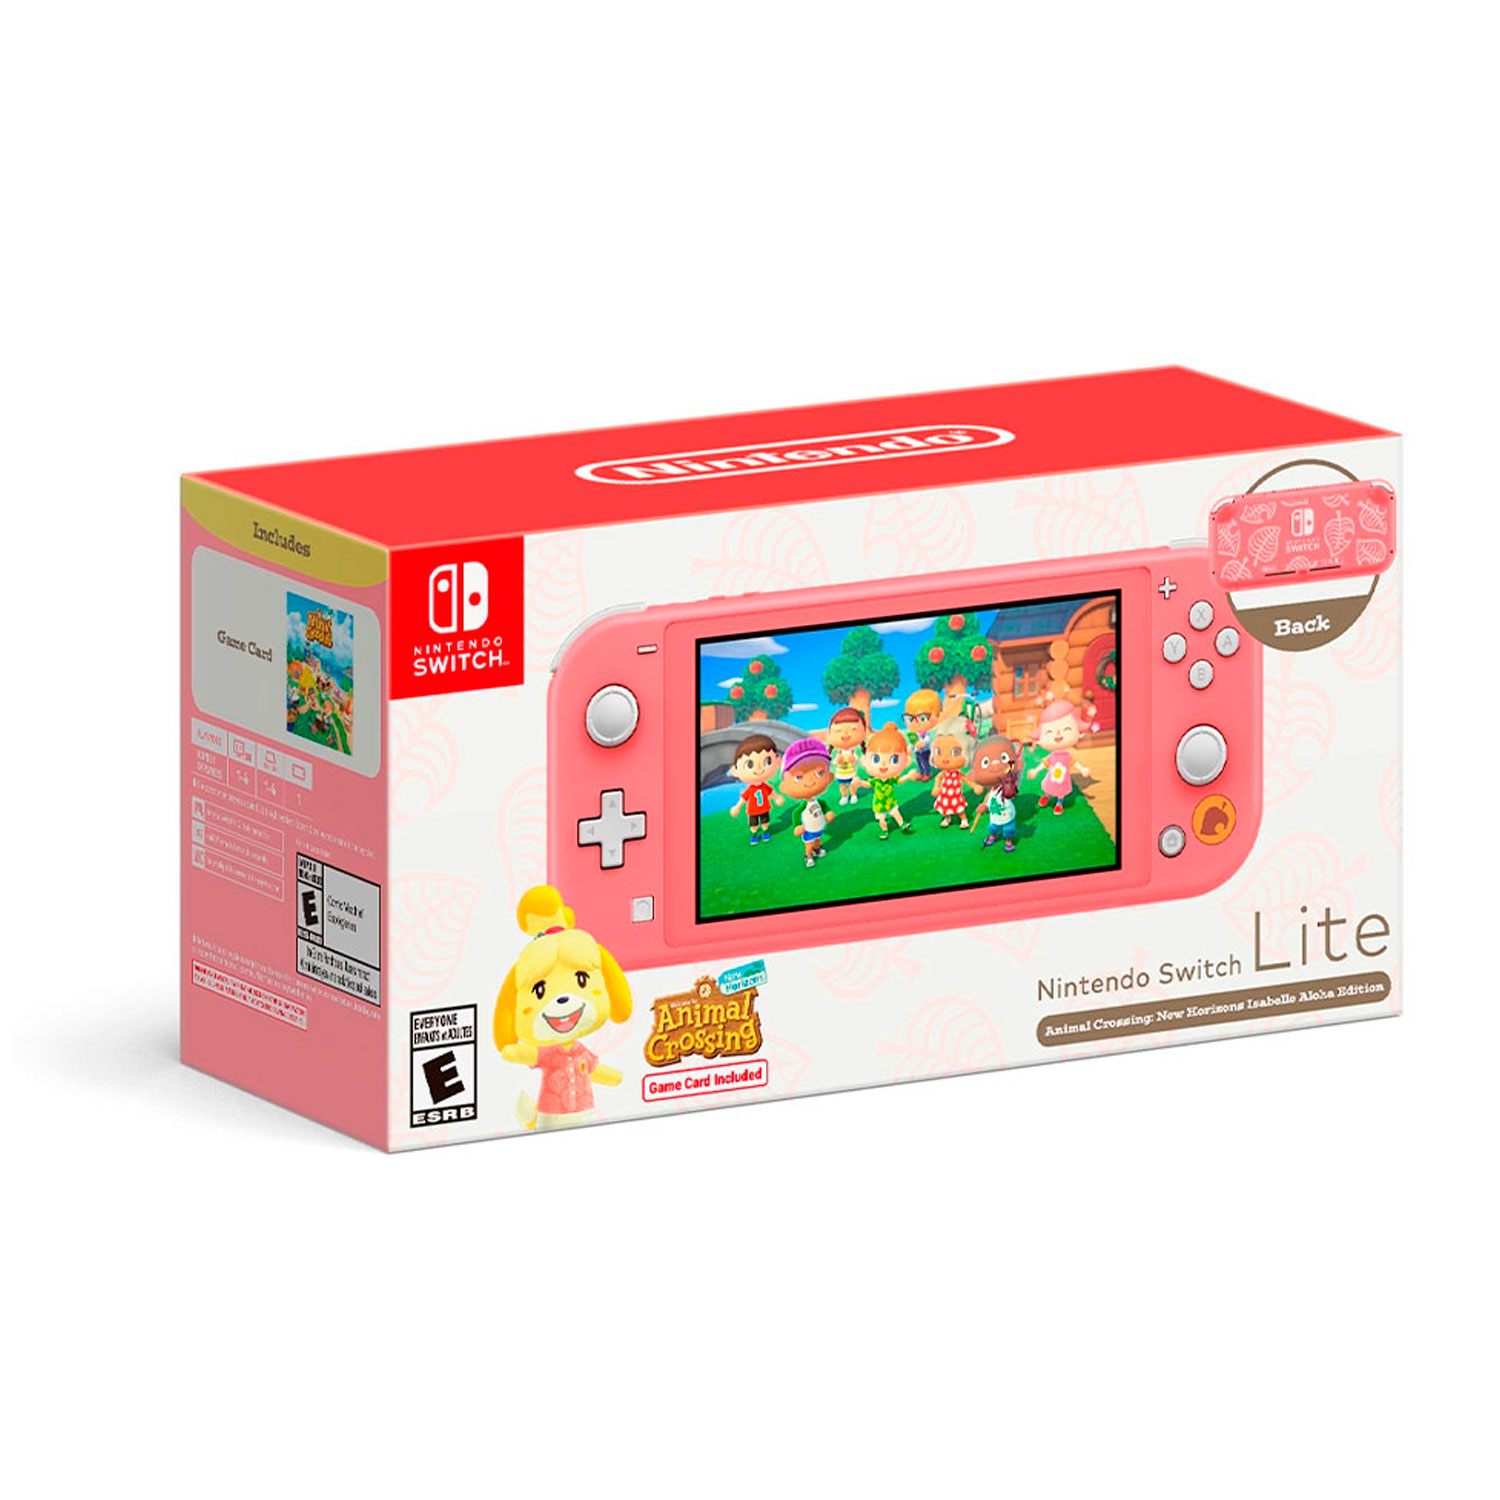 Console Nintendo Switch Lite Aloha Isabelle 32GB Japão + Animal Crossing Timmy - Coral